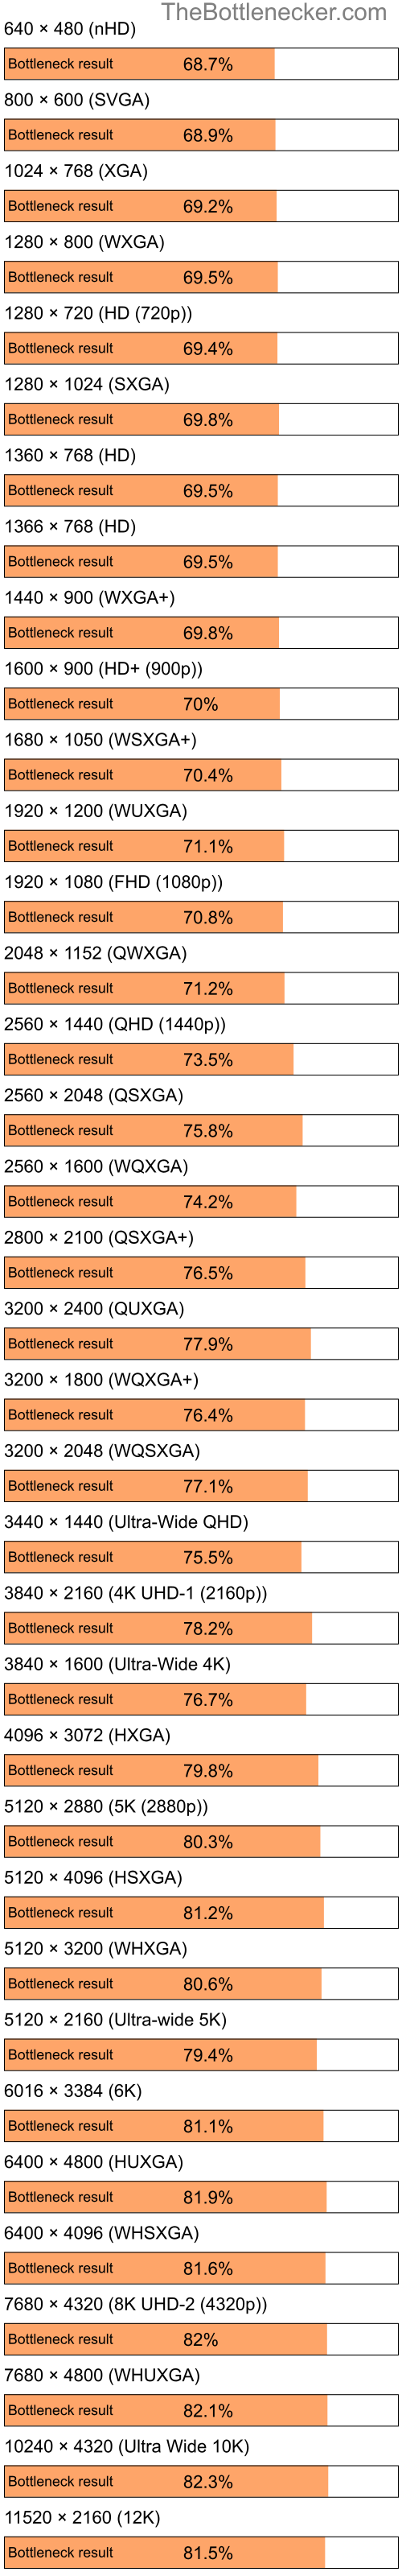 Bottleneck results by resolution for Intel Celeron M 420 and NVIDIA Quadro FX 550 in General Tasks